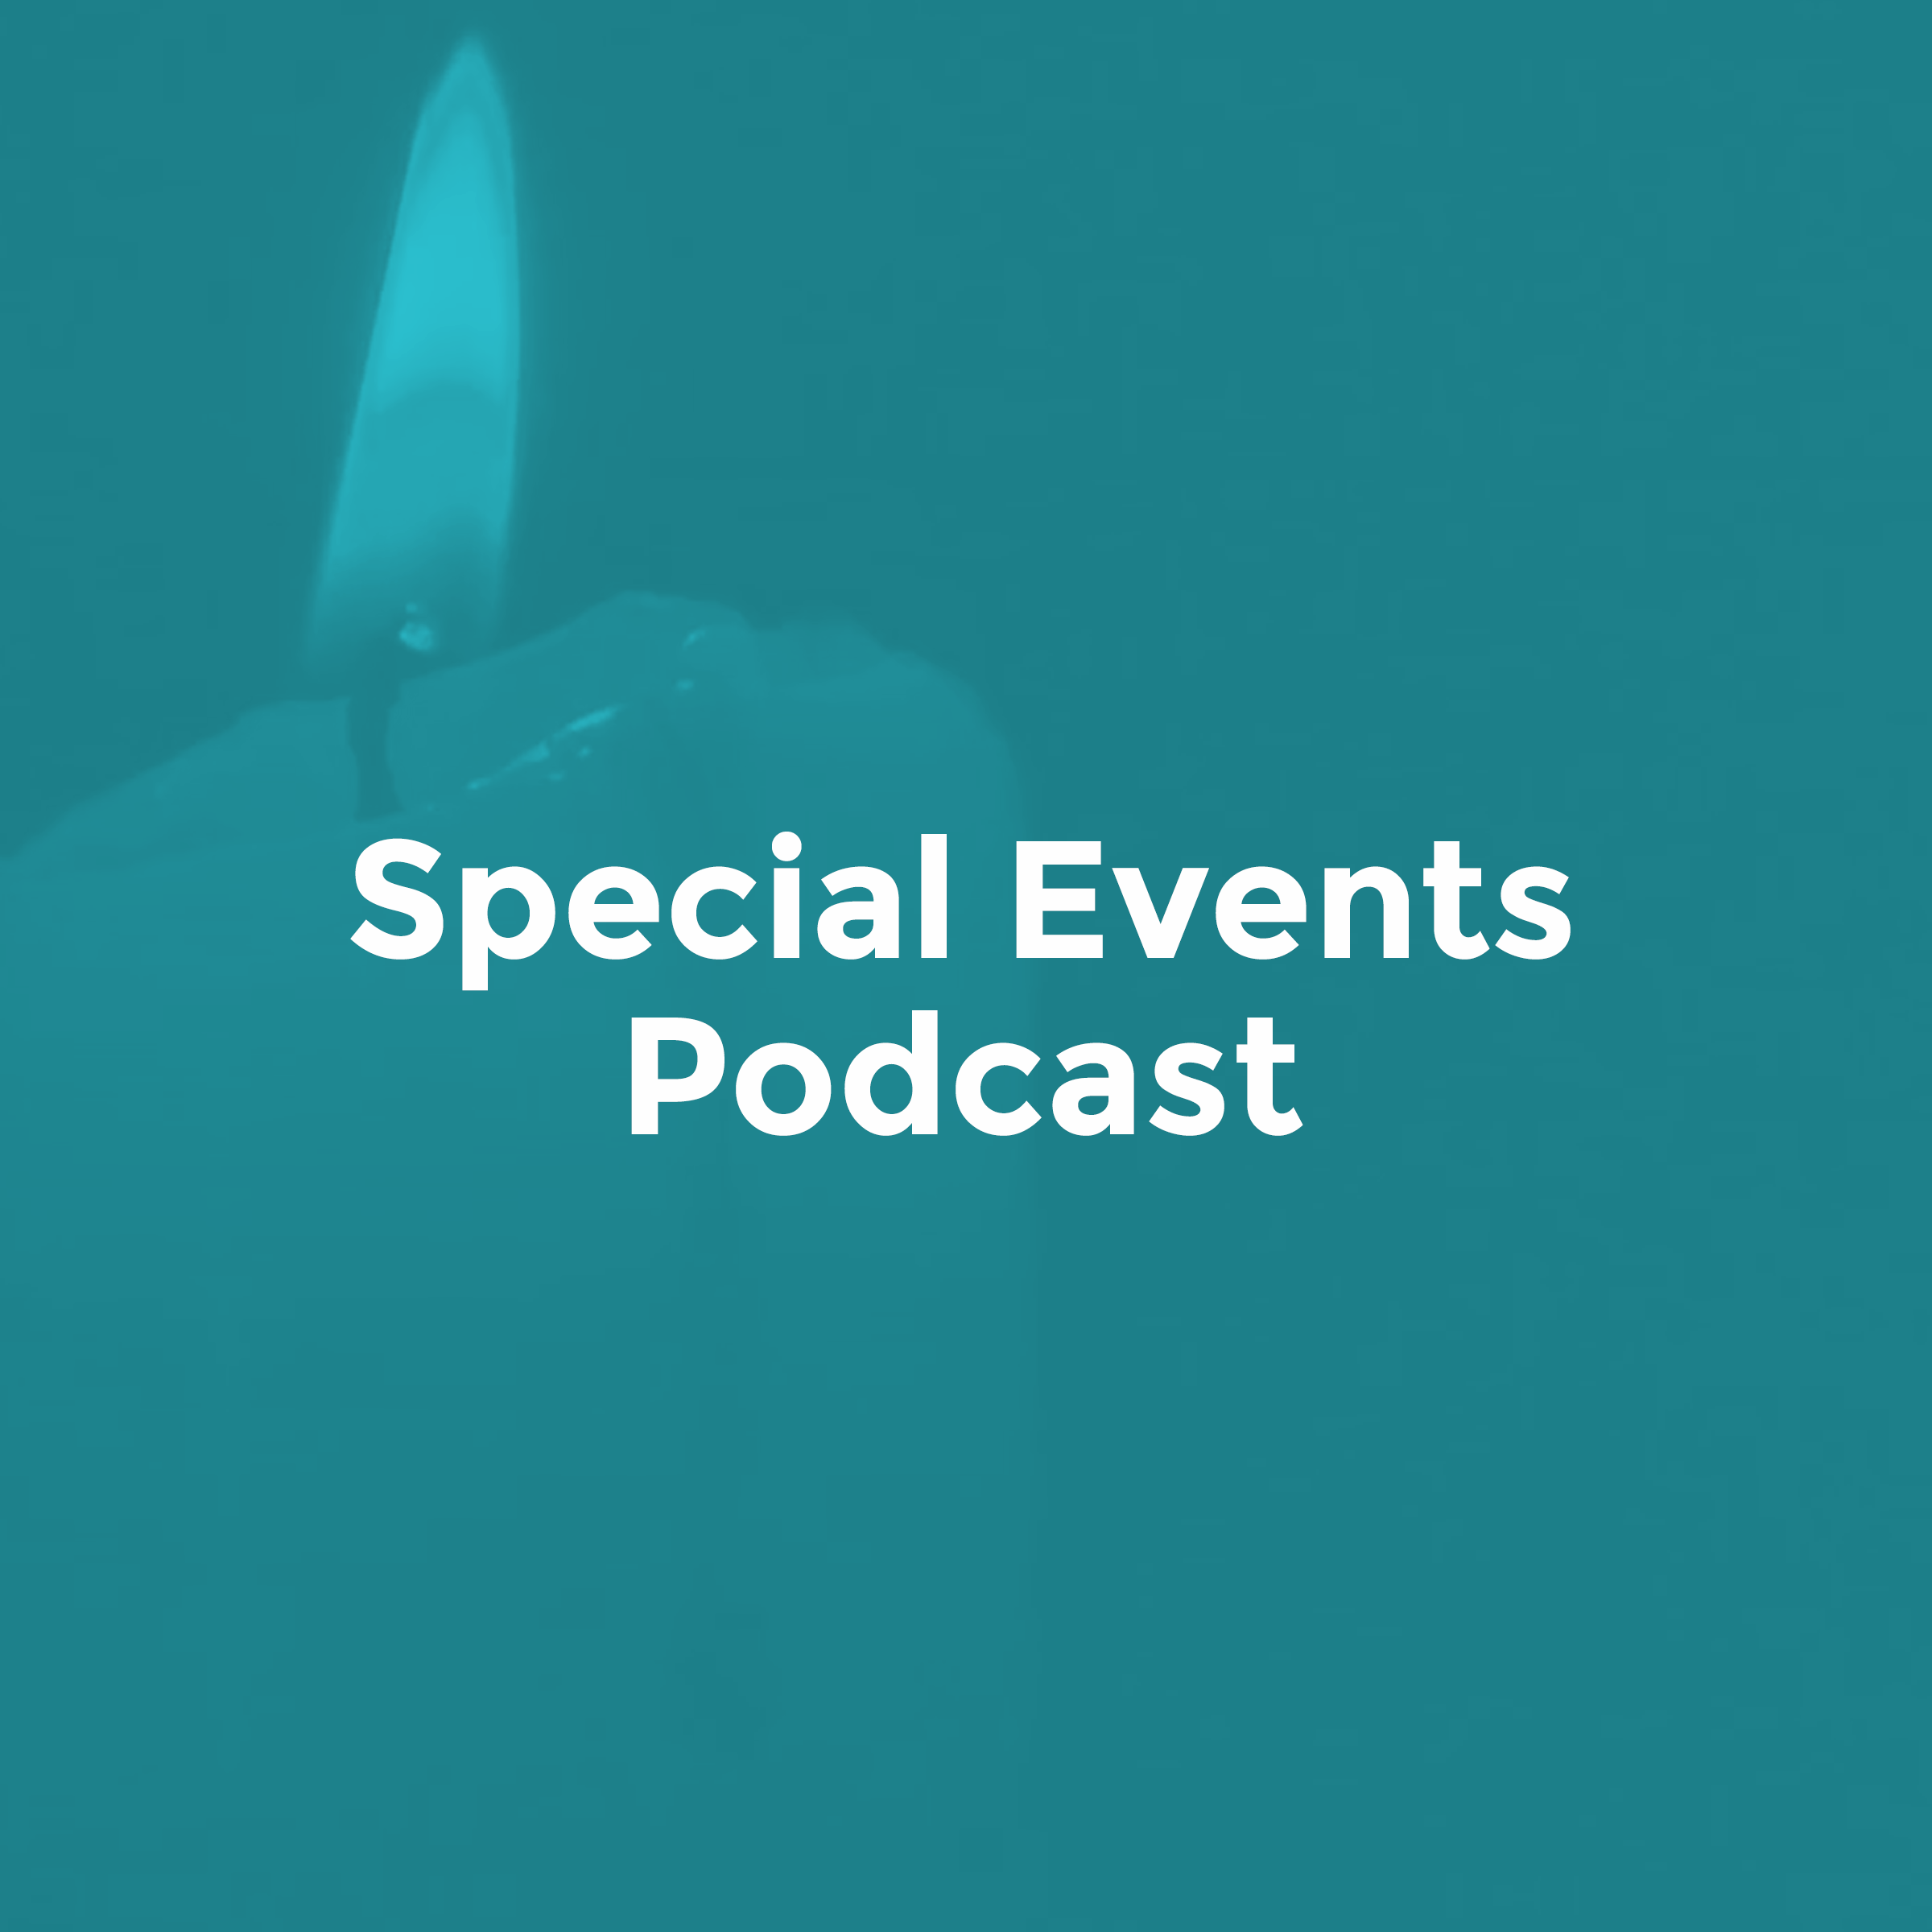 Special Events Podcast